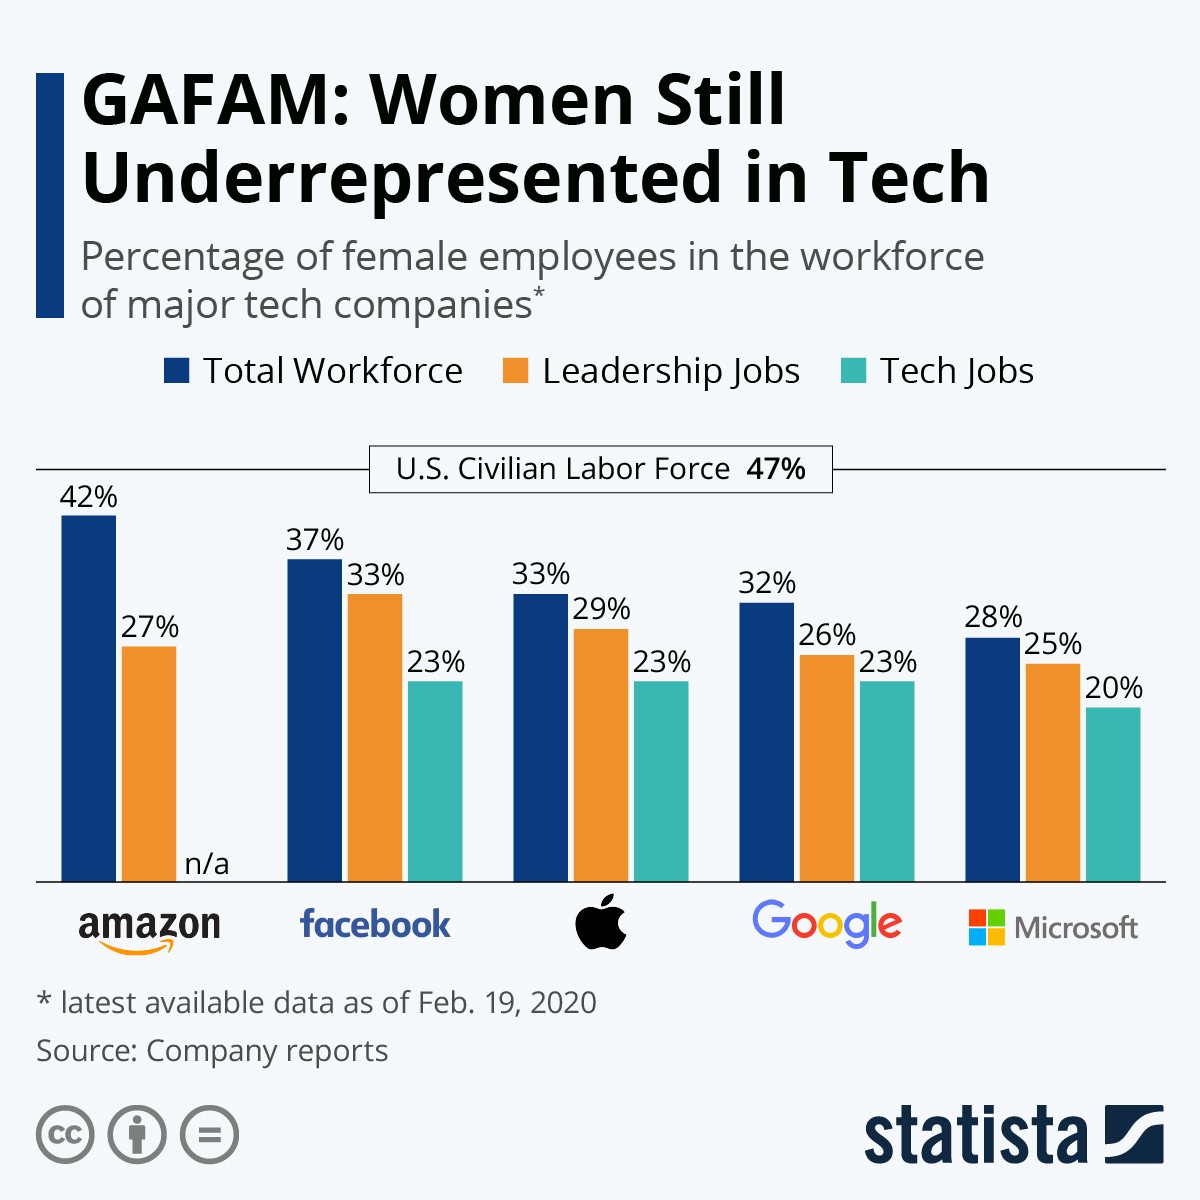 Why we need more women in tech: Redwerk’s employees and customers experience